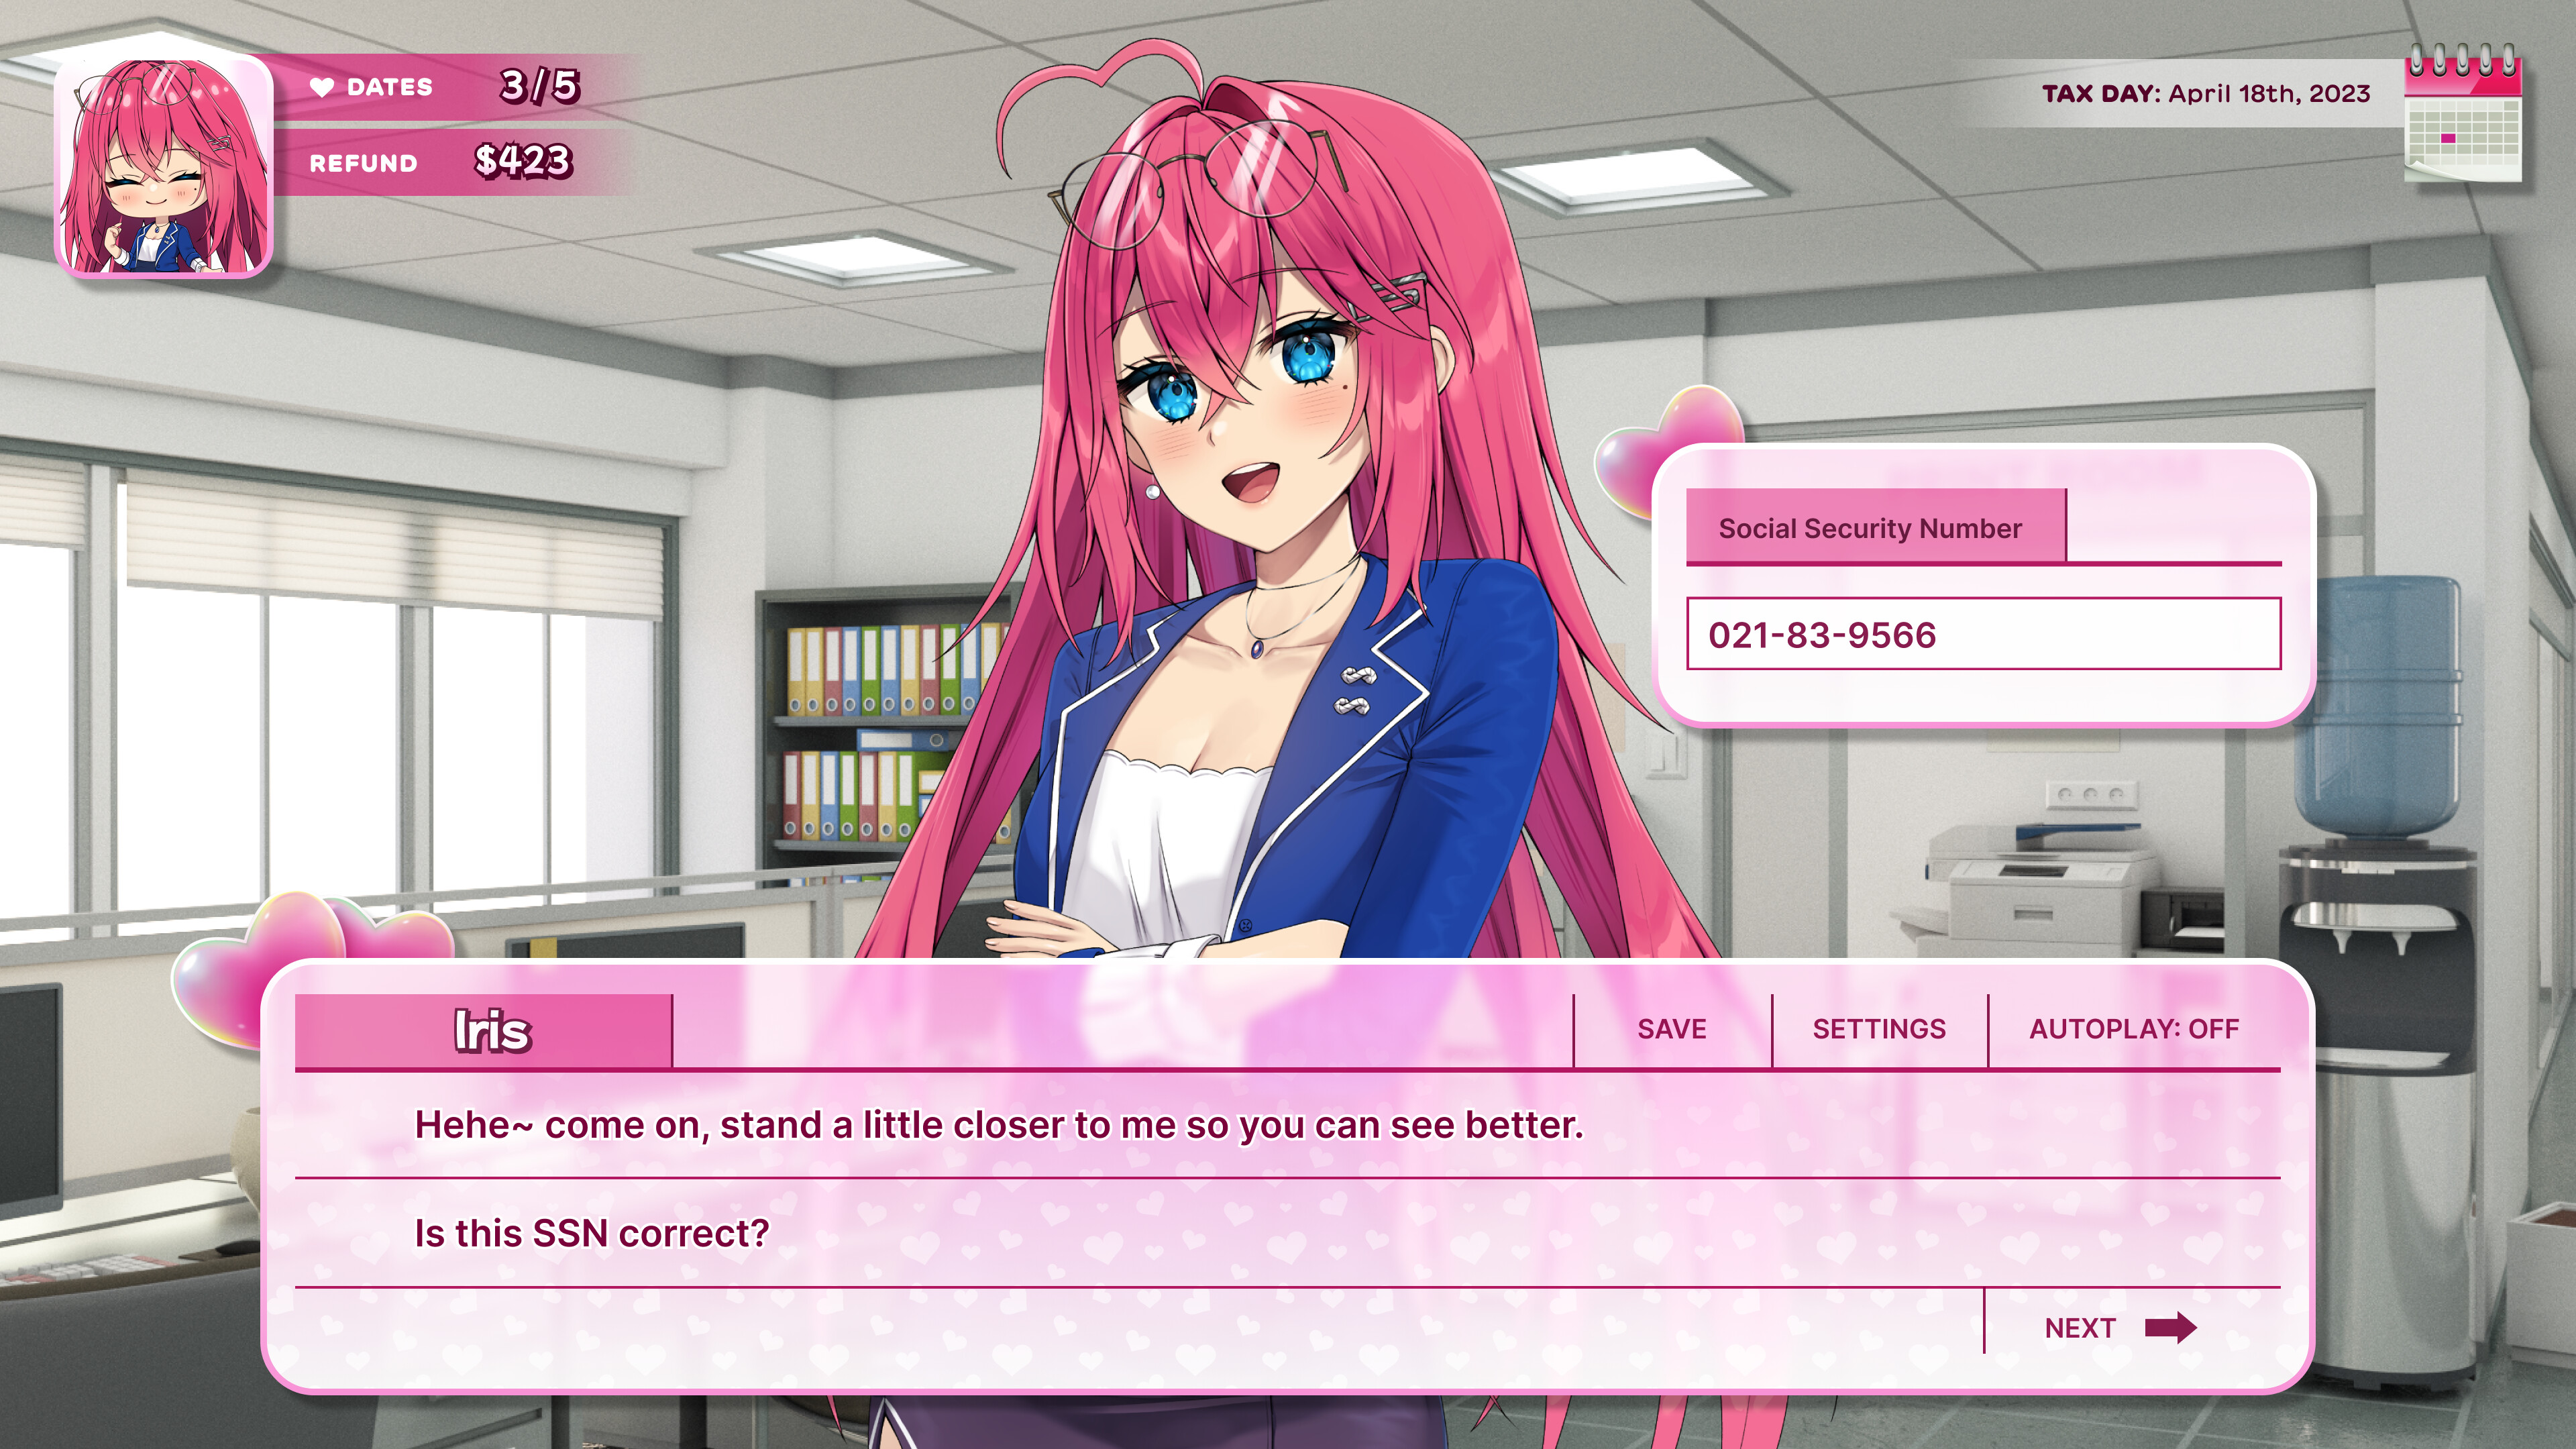 Stressed about taxes? New Anime dating sim will help you file your tax  return